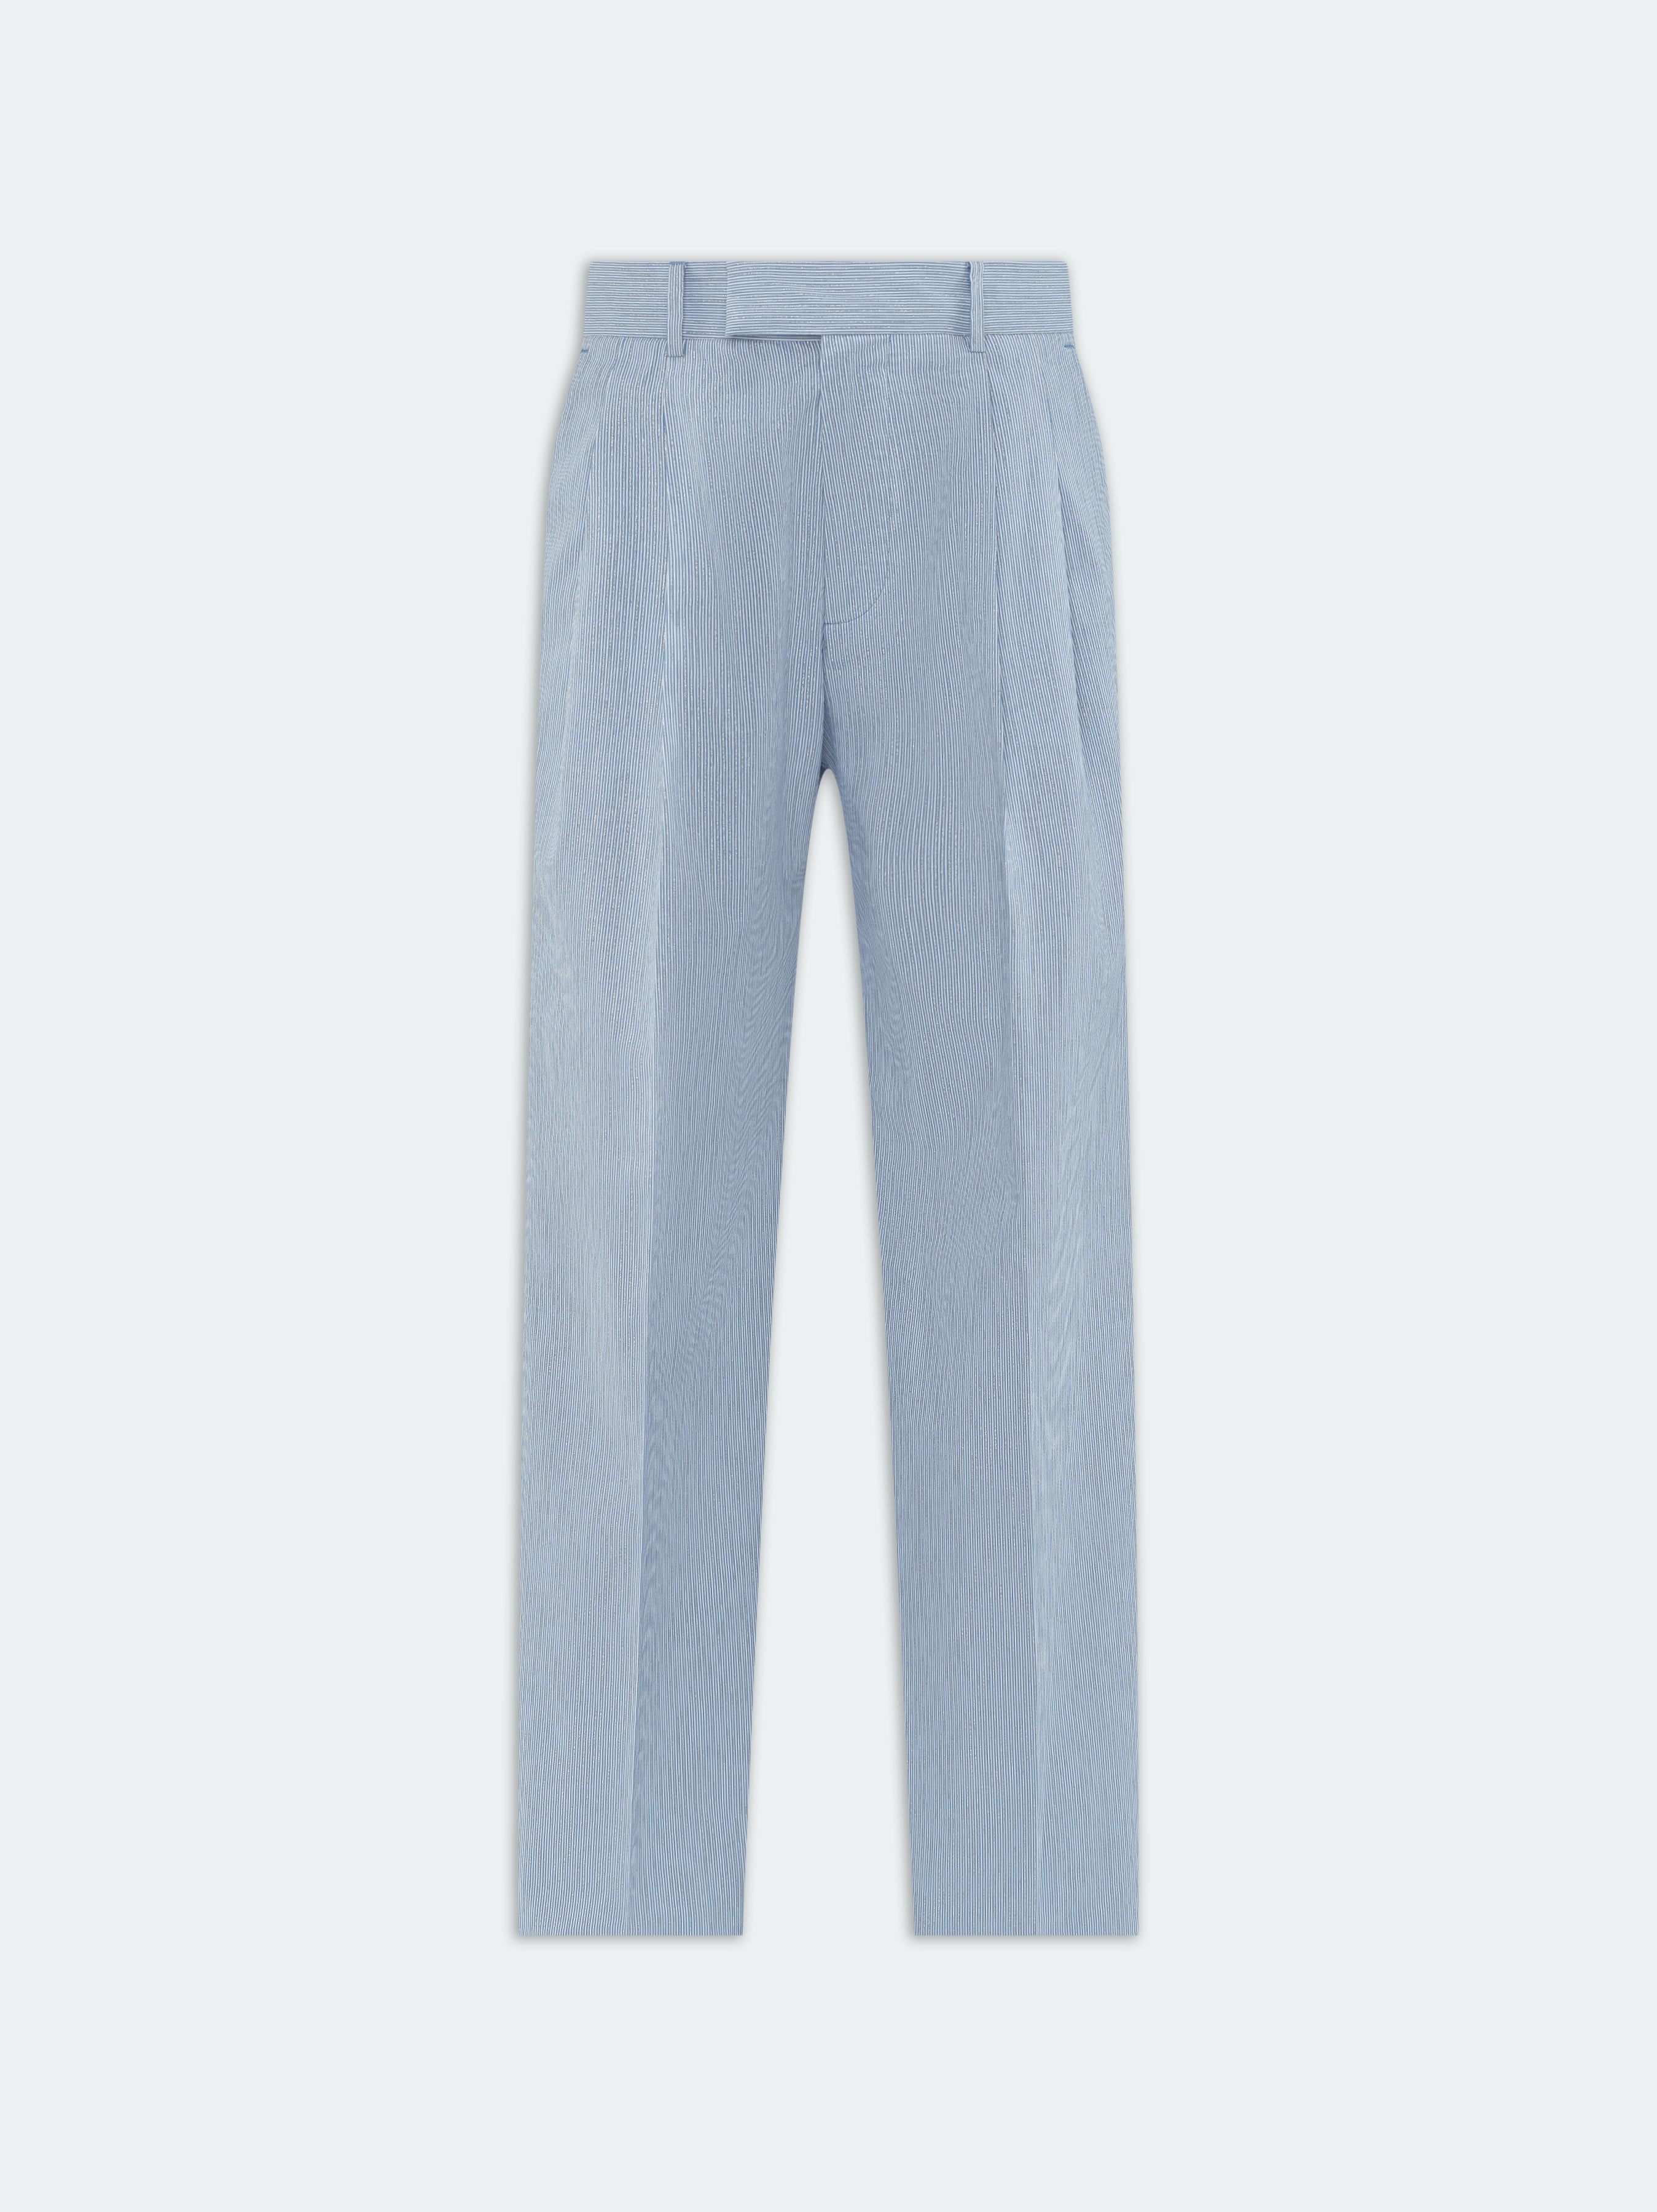 Product SHIMMER STRIPE DOUBLE-PLEATED PANT - Ashley Blue featured image